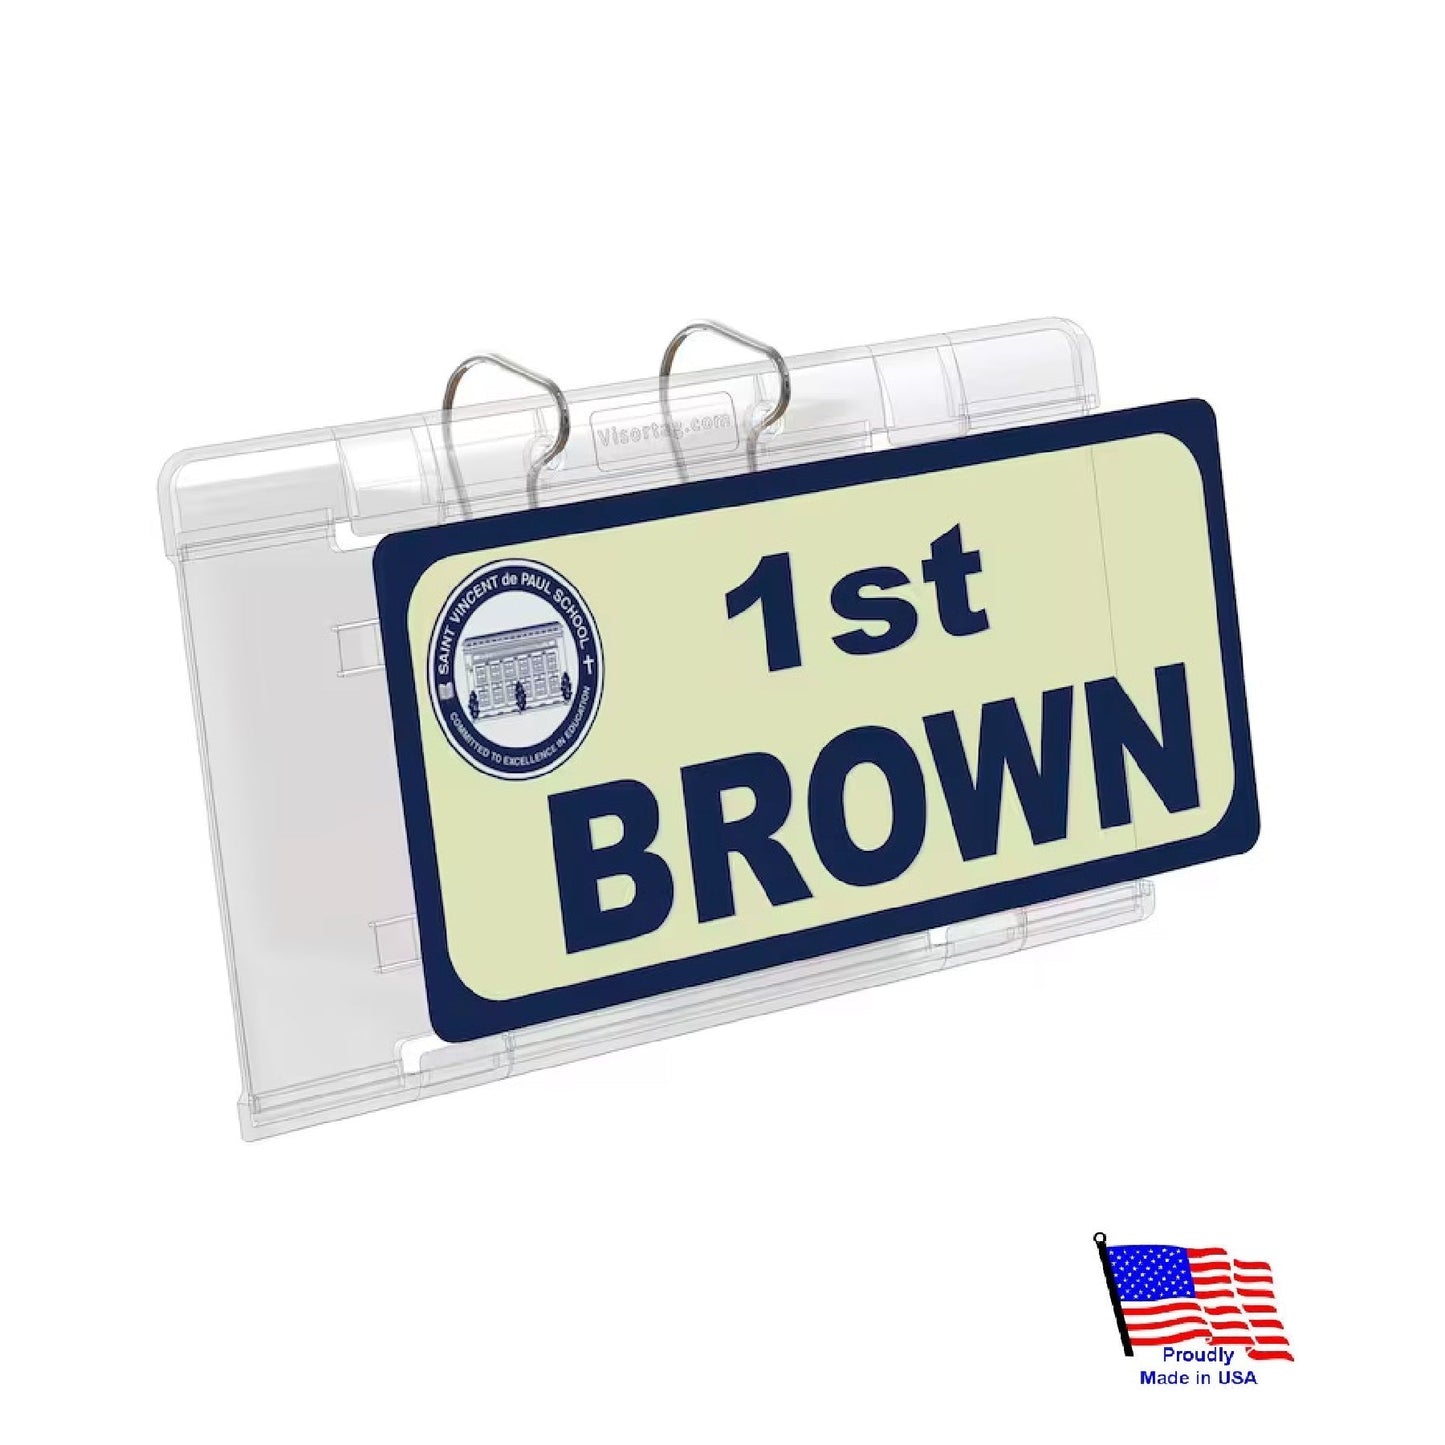 Elementary Student Pick up Permit Holder & Protector - Visortag® VTSH140. Easily Display & Swing Away Your Permit. Stored on Visor. Patented & Made in USA